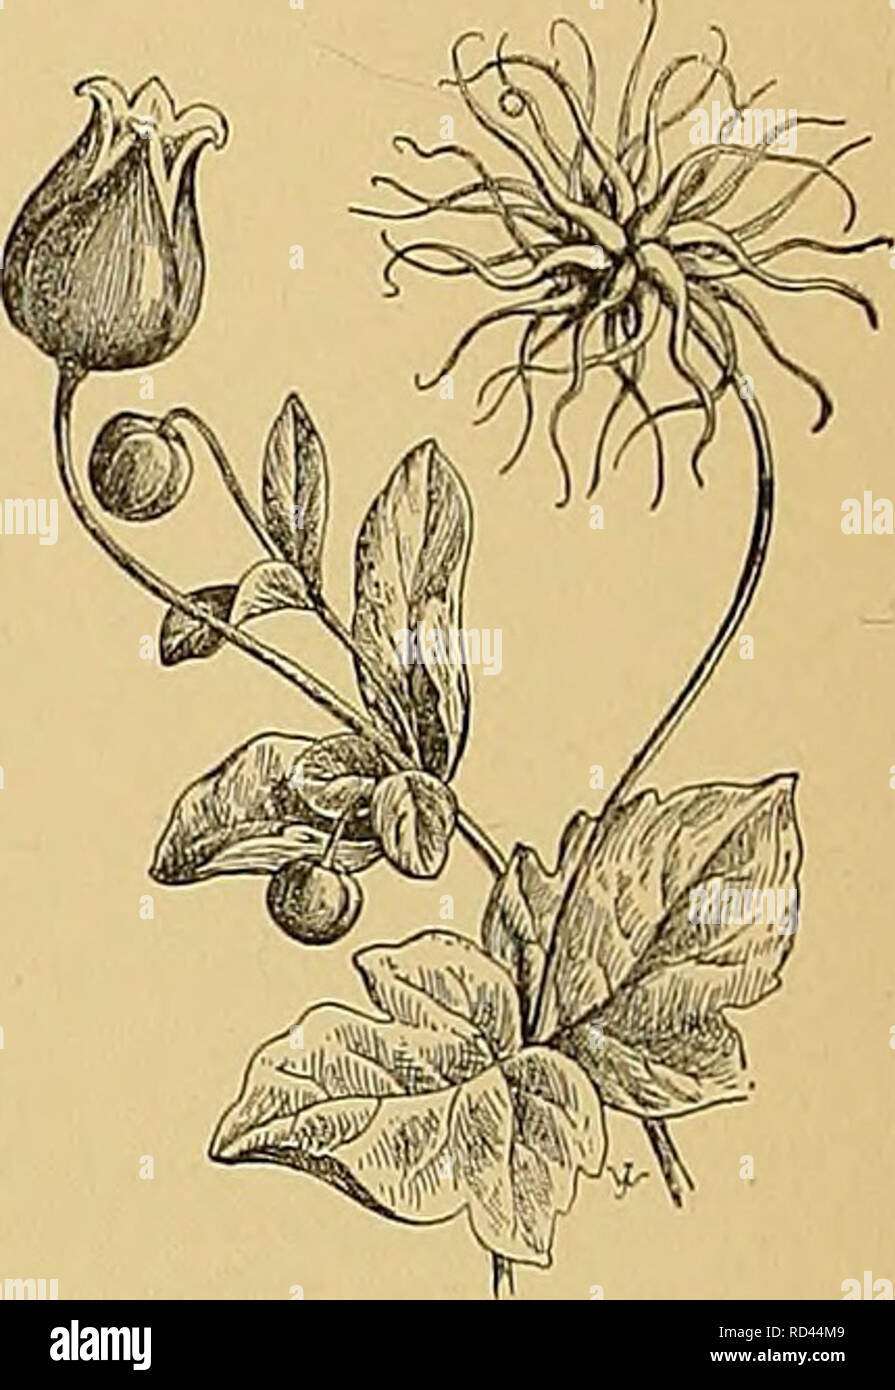 . Cyclopedia of American horticulture, comprising suggestions for cultivation of horticultural plants, descriptions of the species of fruits, vegetables, flowers, and ornamental plants sold in the United States and Canada, together with geographical and biographical sketches. Gardening. 491. Clematis Viorna. very much doubled; se- -  - 1553. 490. Clematis florida, var. bicolor. Modesta, Modeste-Gu6rin (—C. V.X C, lanuginosa). Fls. well expanded, large, bright blue, bars deeper colored. Fitlgens, Simon-Louis (=C, V.,var grandiflora'X C. lanugi- nosa). Sepals &amp;-6, rather narrow, dark purple Stock Photo